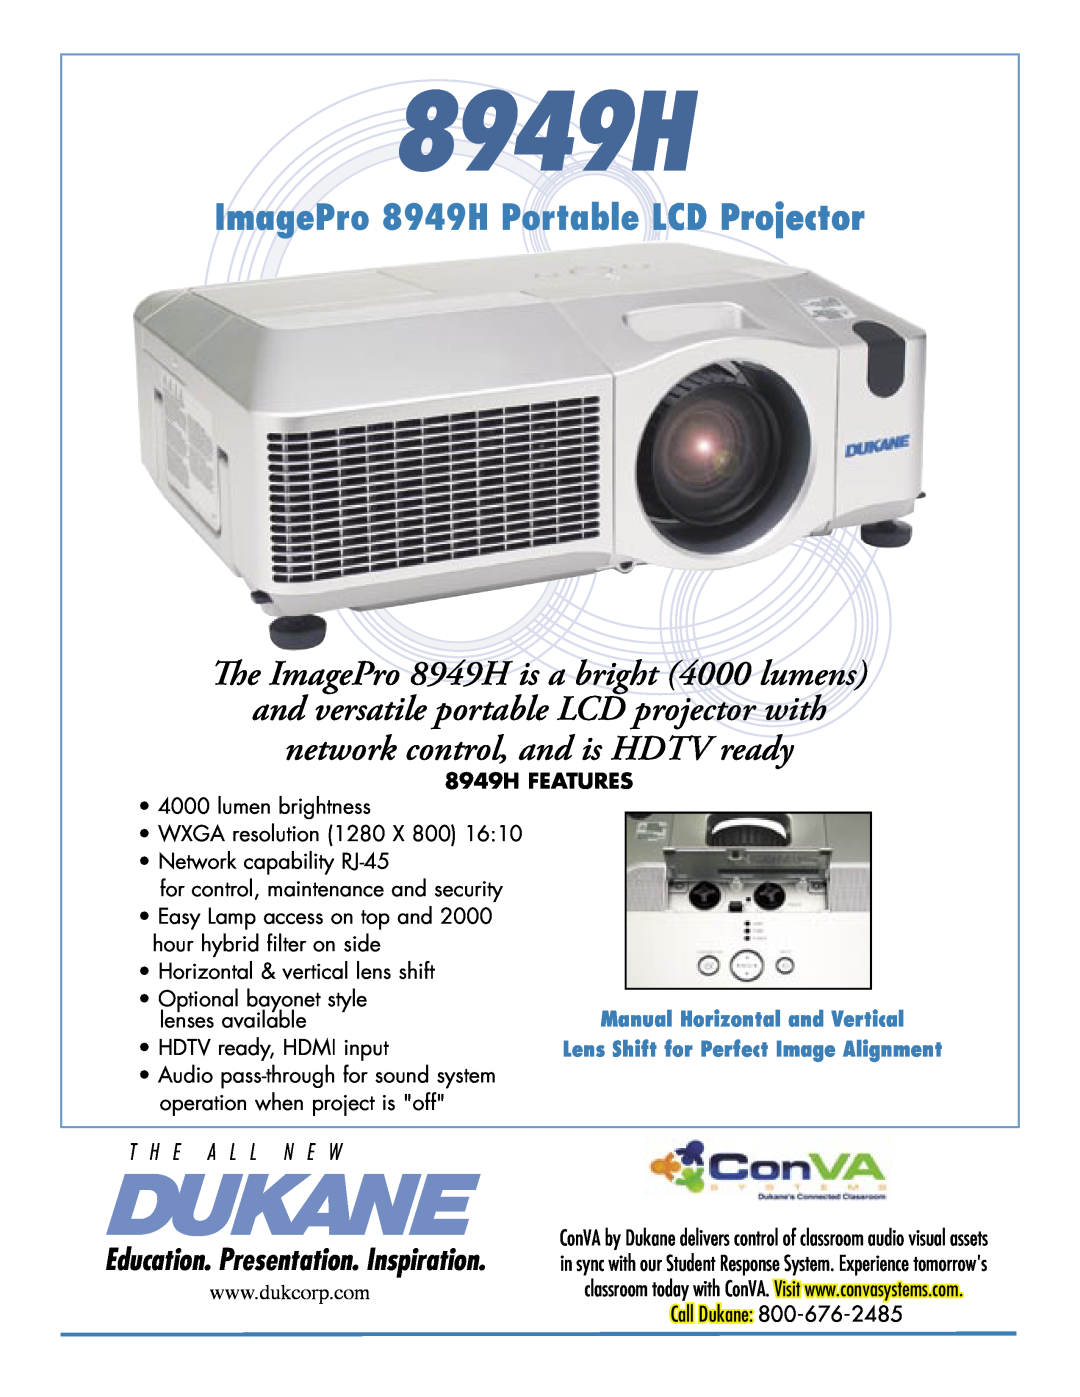 Dukane manual 8949H FEATURES, ImagePro 8949H Portable LCD Projector, The ImagePro 8949H is a bright 4000 lumens 